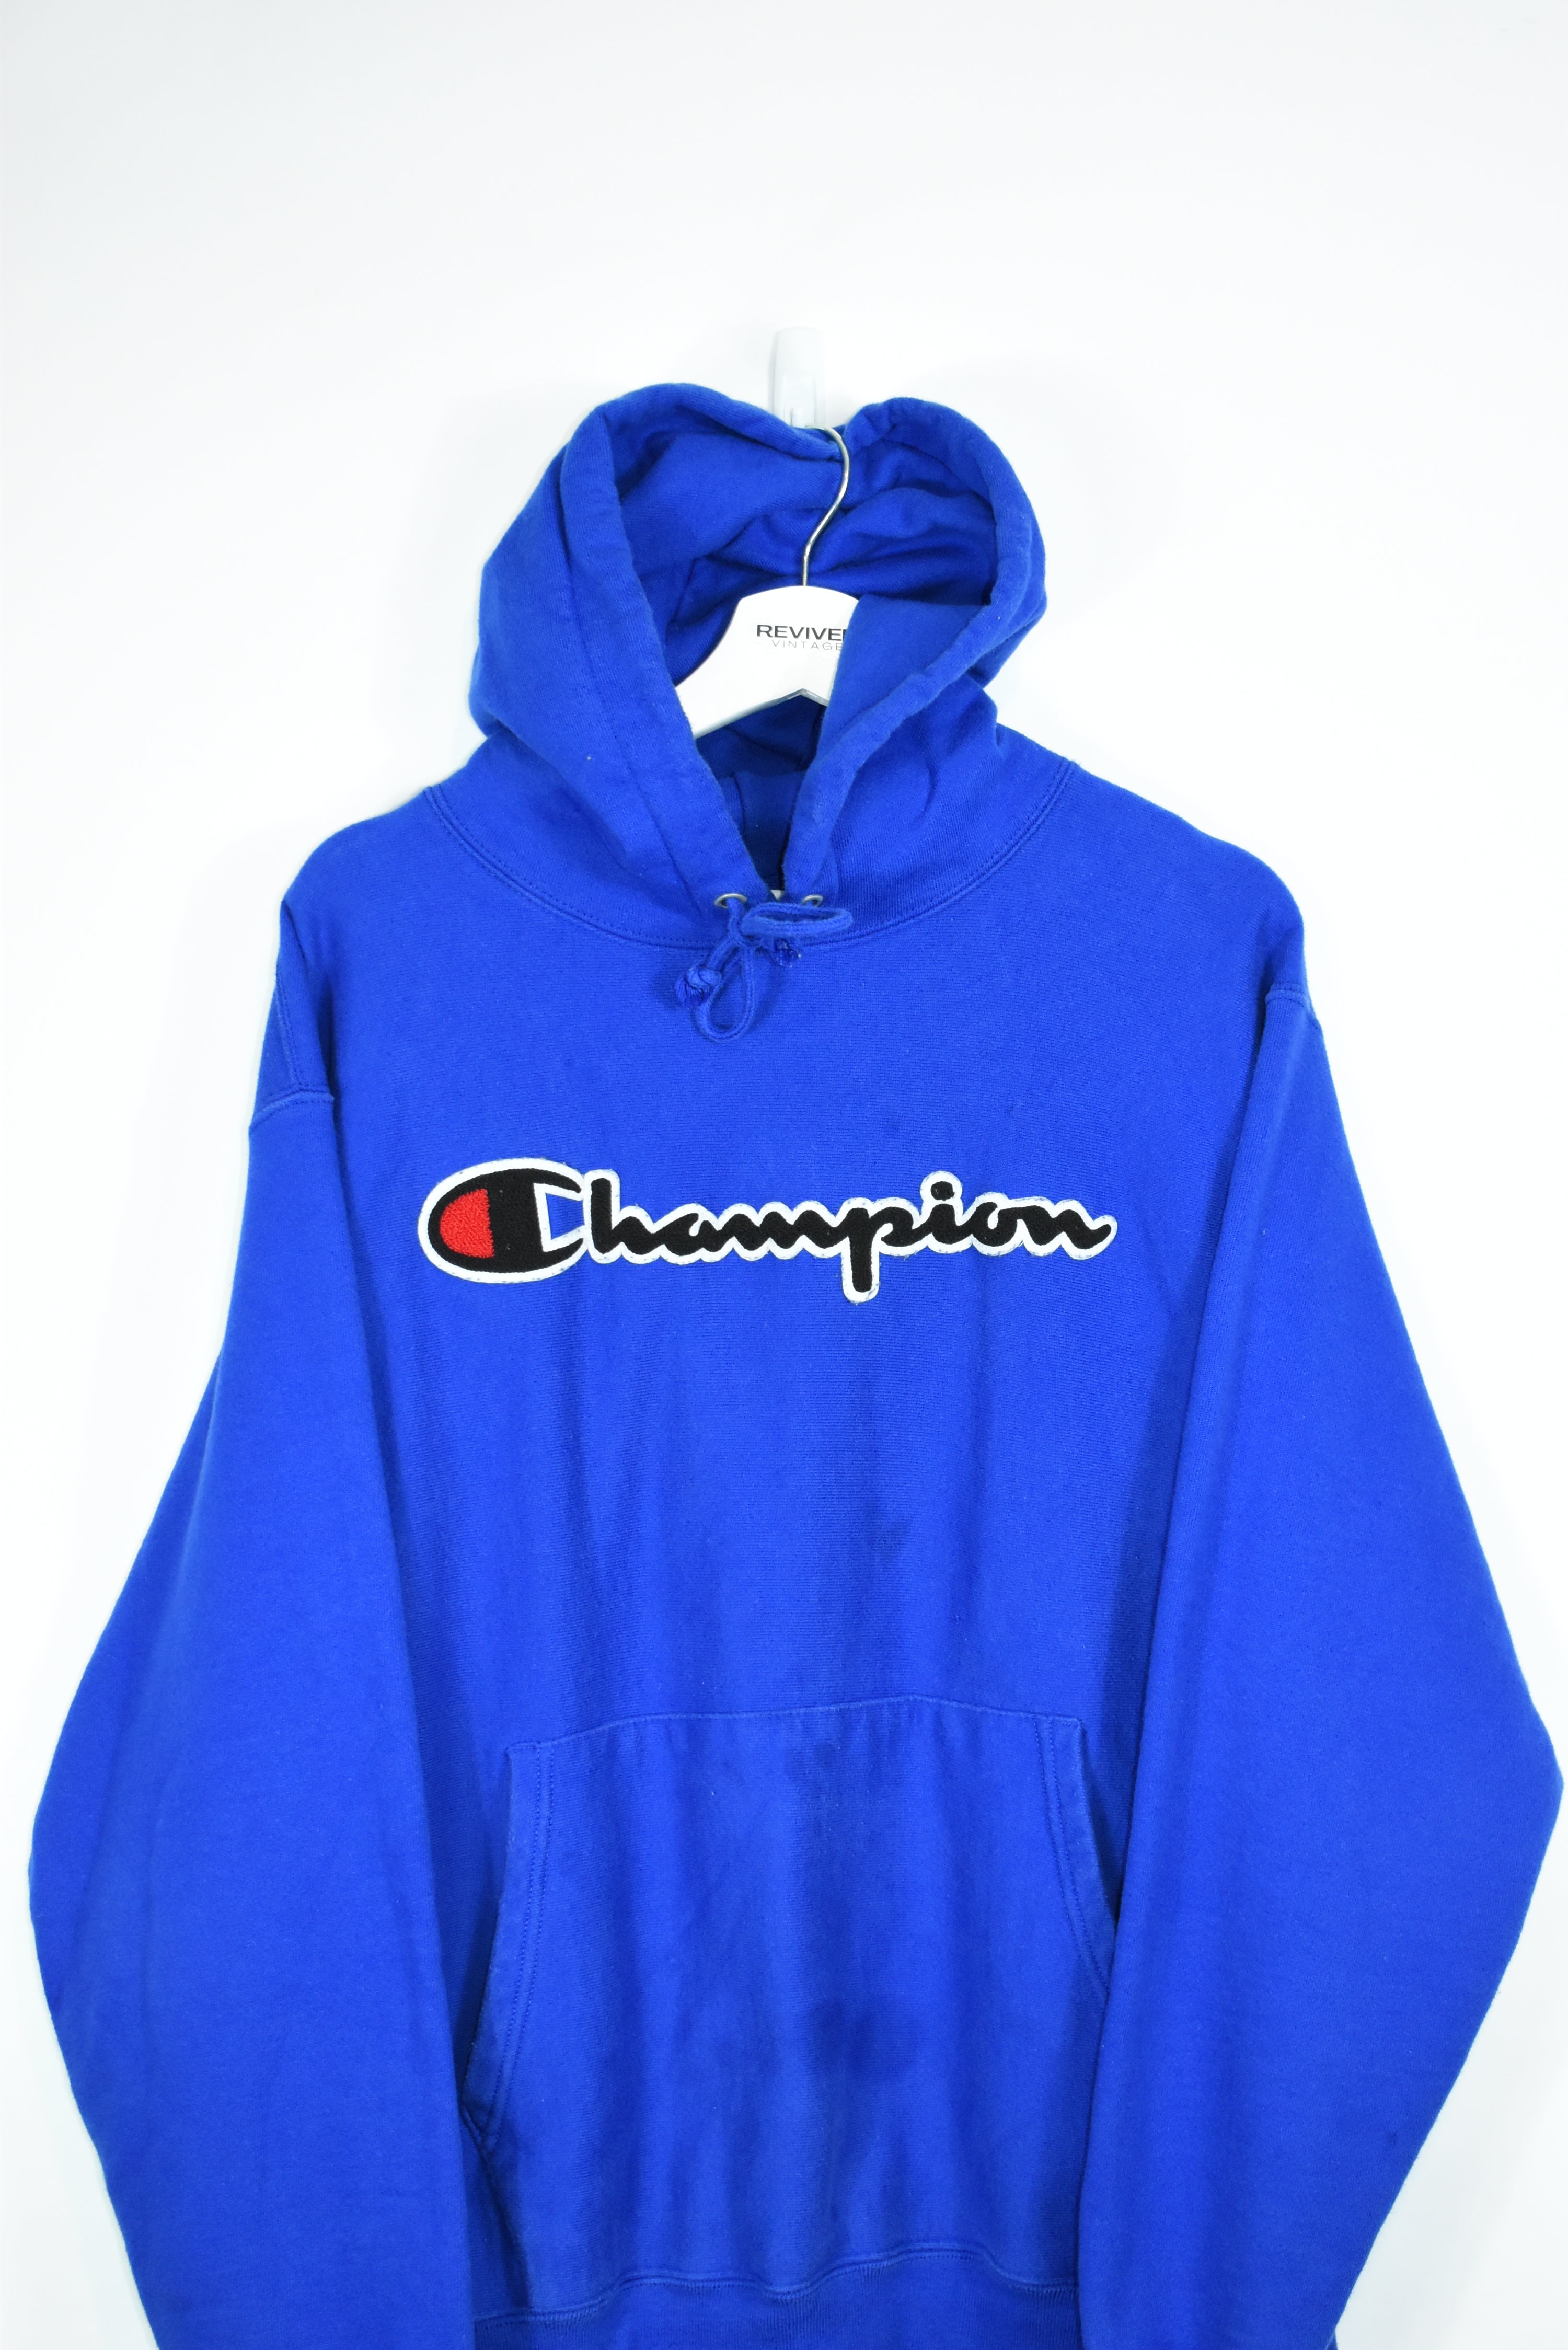 Vintage Champion Embroidery Spellout Hoodie Large (Baggy)